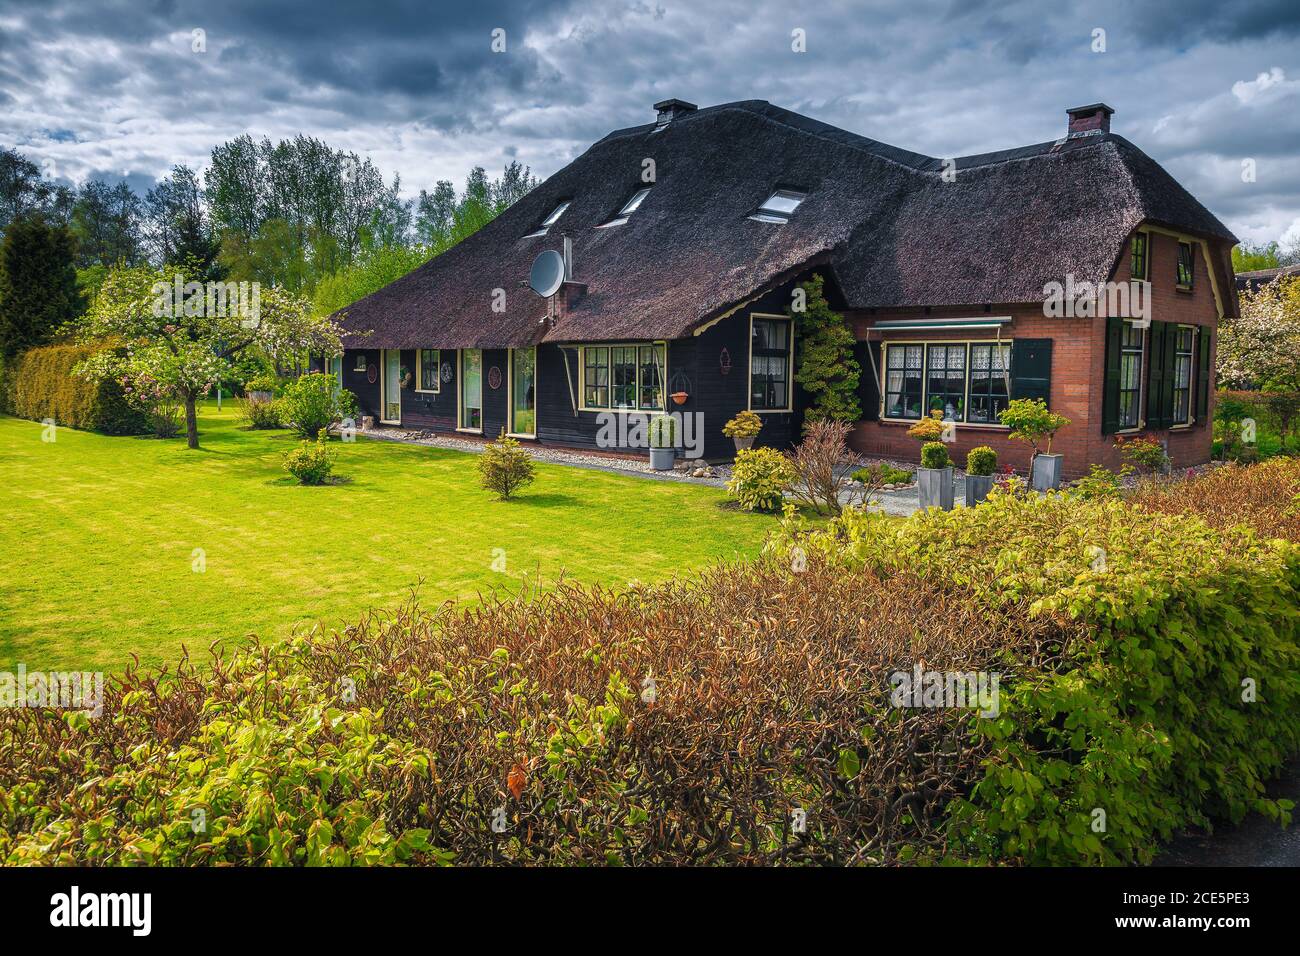 Cozy luxury dutch house with thatched roof and orderly front yard. Ornamental garden with green grass and plants. Facade with garden and green bushes Stock Photo